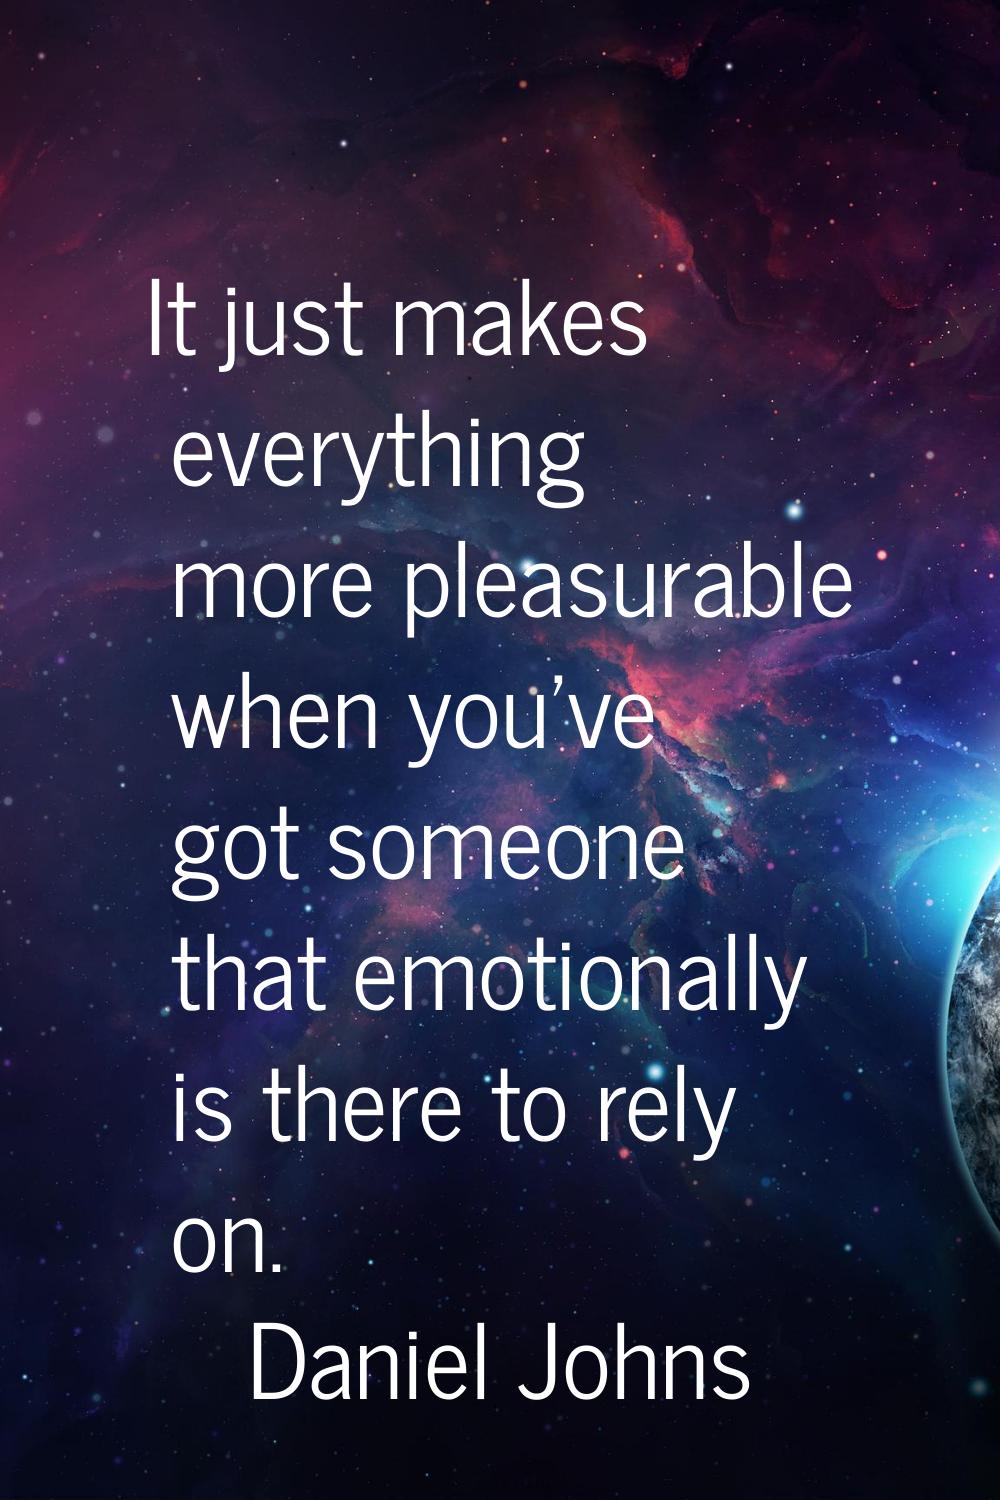 It just makes everything more pleasurable when you've got someone that emotionally is there to rely